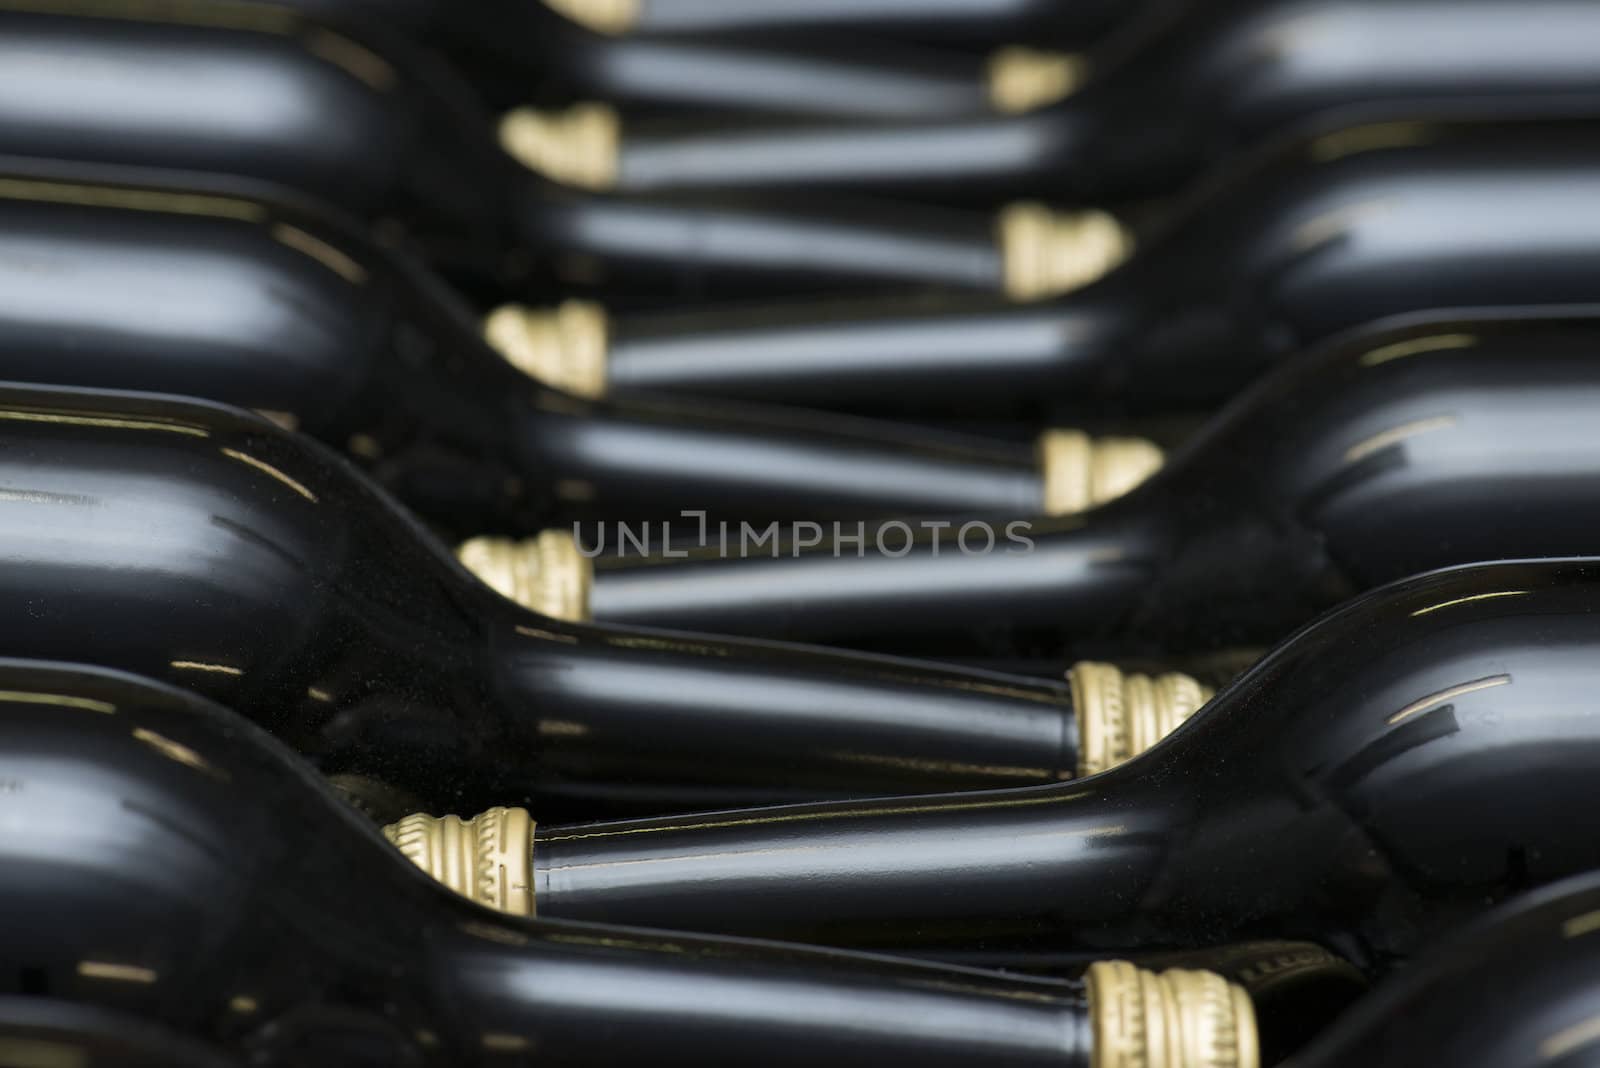 Many of Wine Bottles In A Row